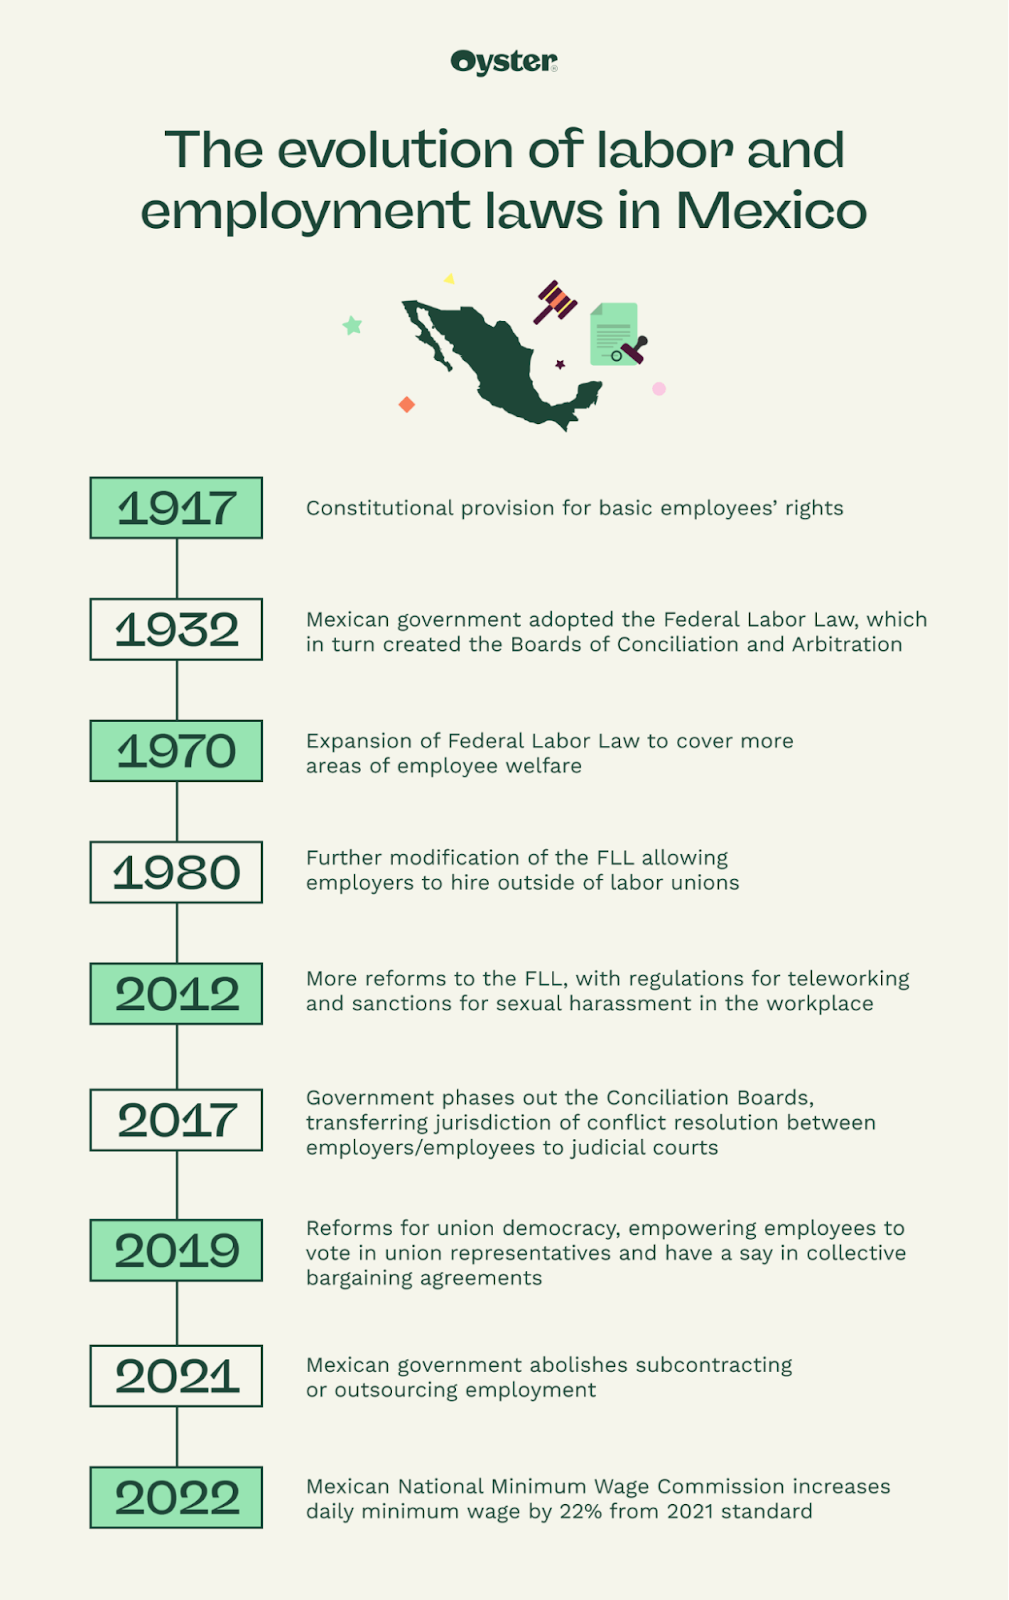 History of labor and employment laws in Mexico